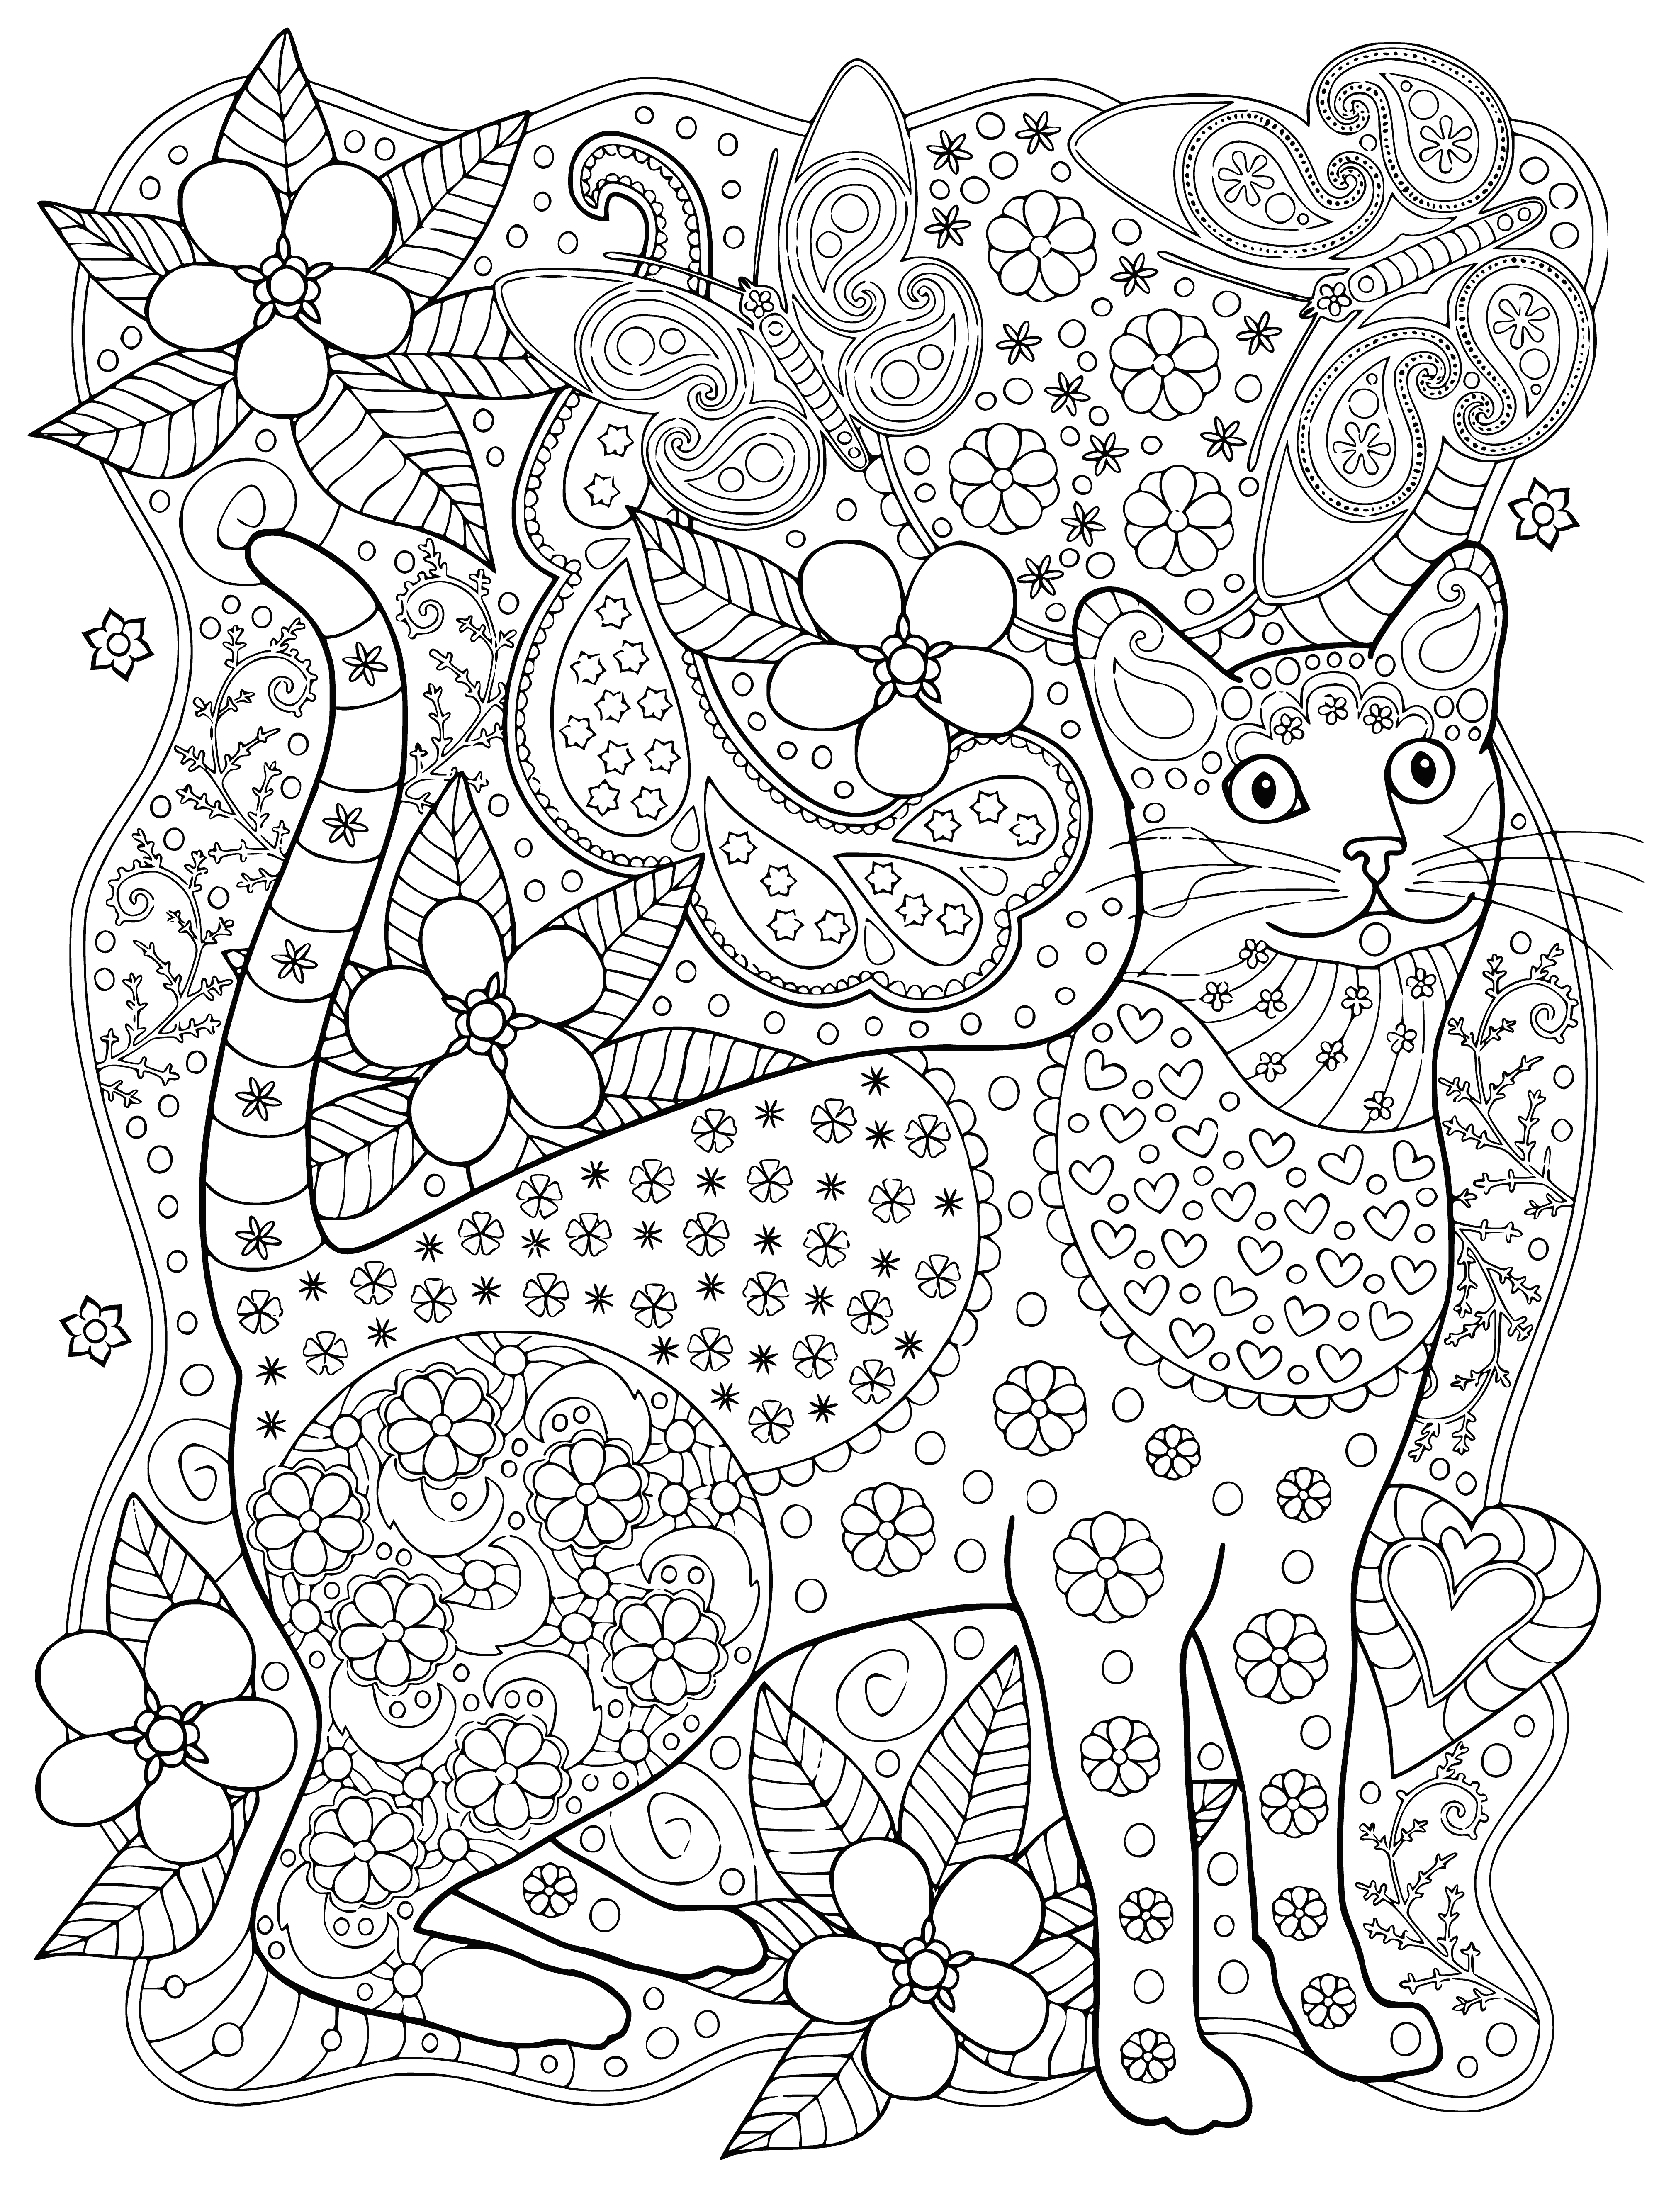 Cat and butterflies coloring page